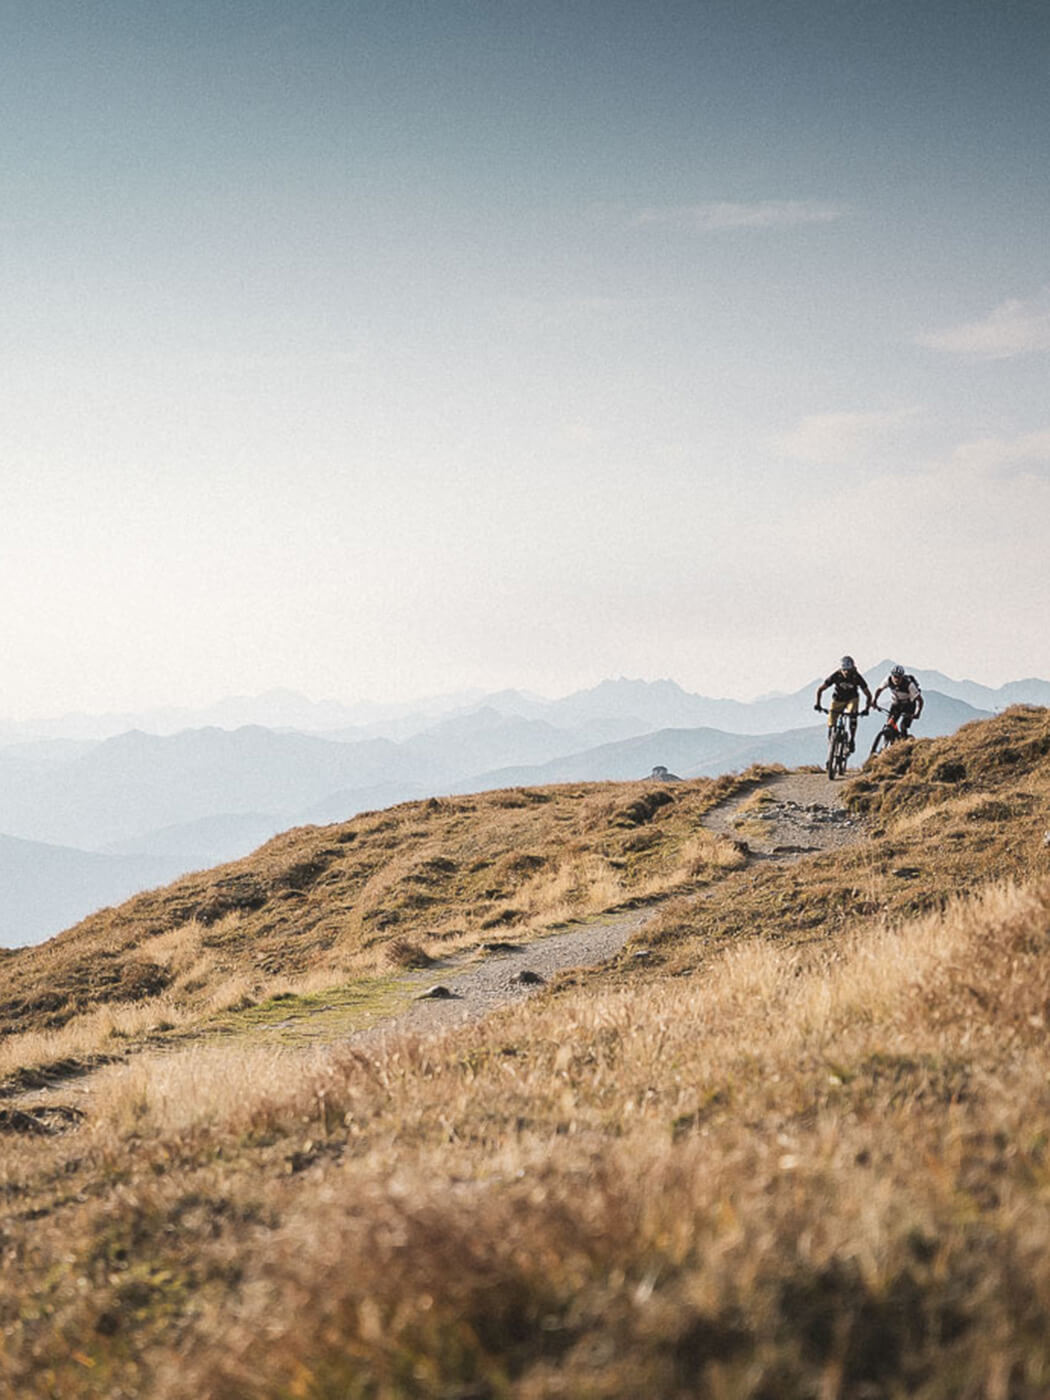 Alpenblick's extra package for MTB & EMTB riders